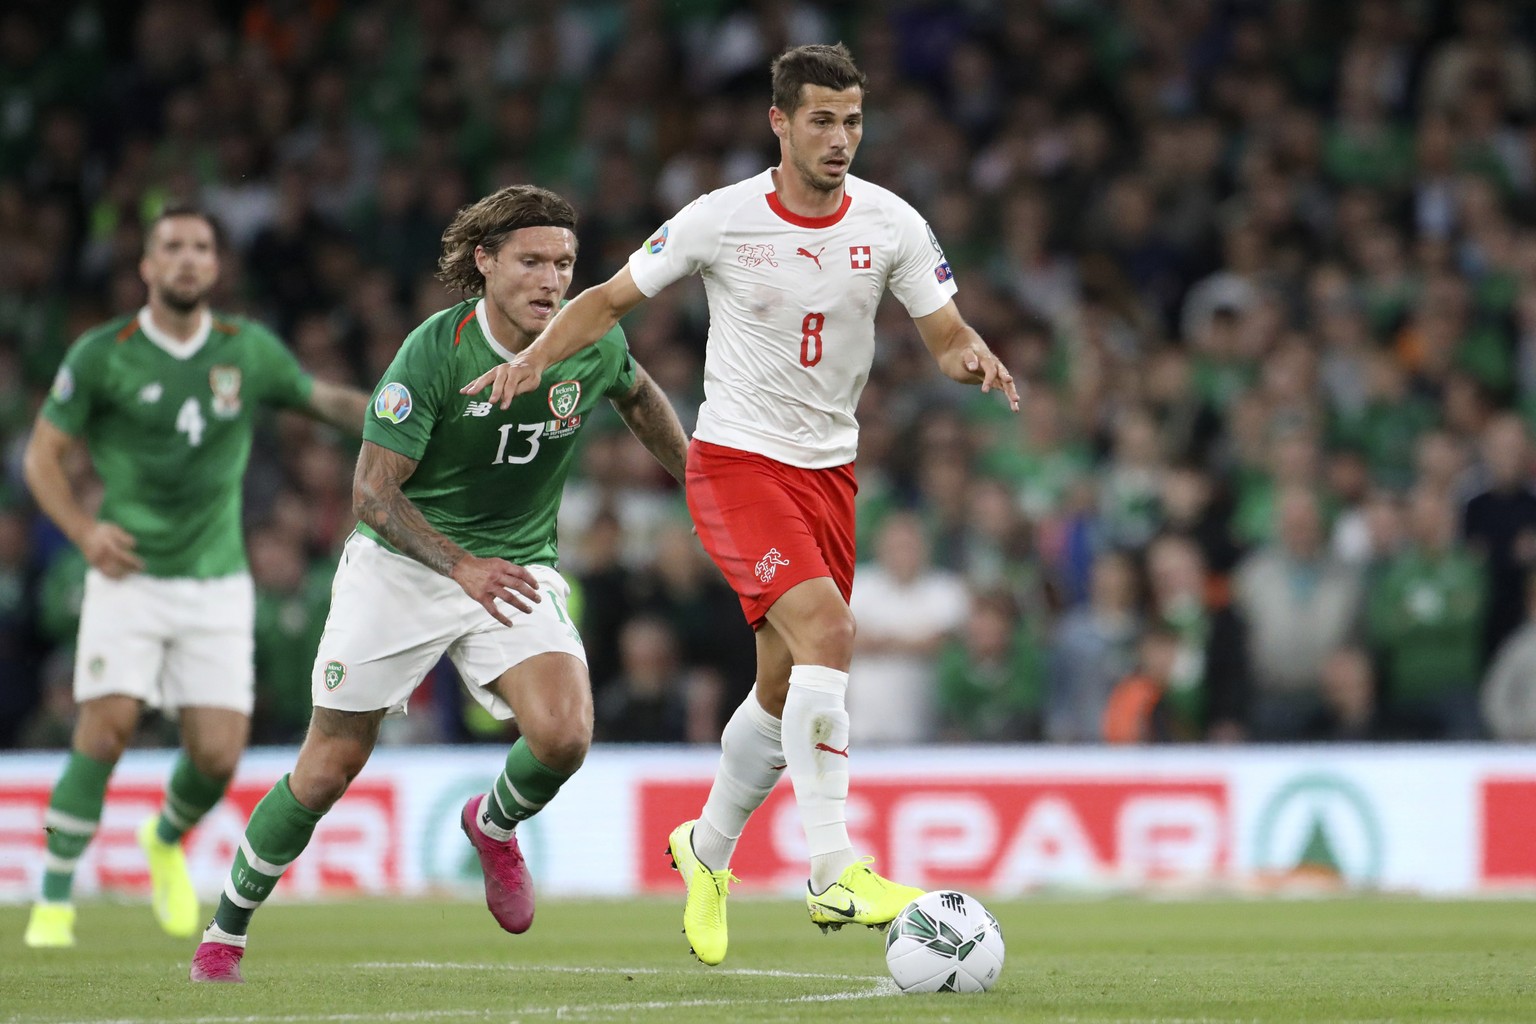 Switzerland&#039;s Remo Freuler runs with the ball away from Ireland&#039;s Jeff Hendrick, center, during the Euro 2020 group D qualifying soccer match between Ireland and Switzerland at the Aviva sta ...